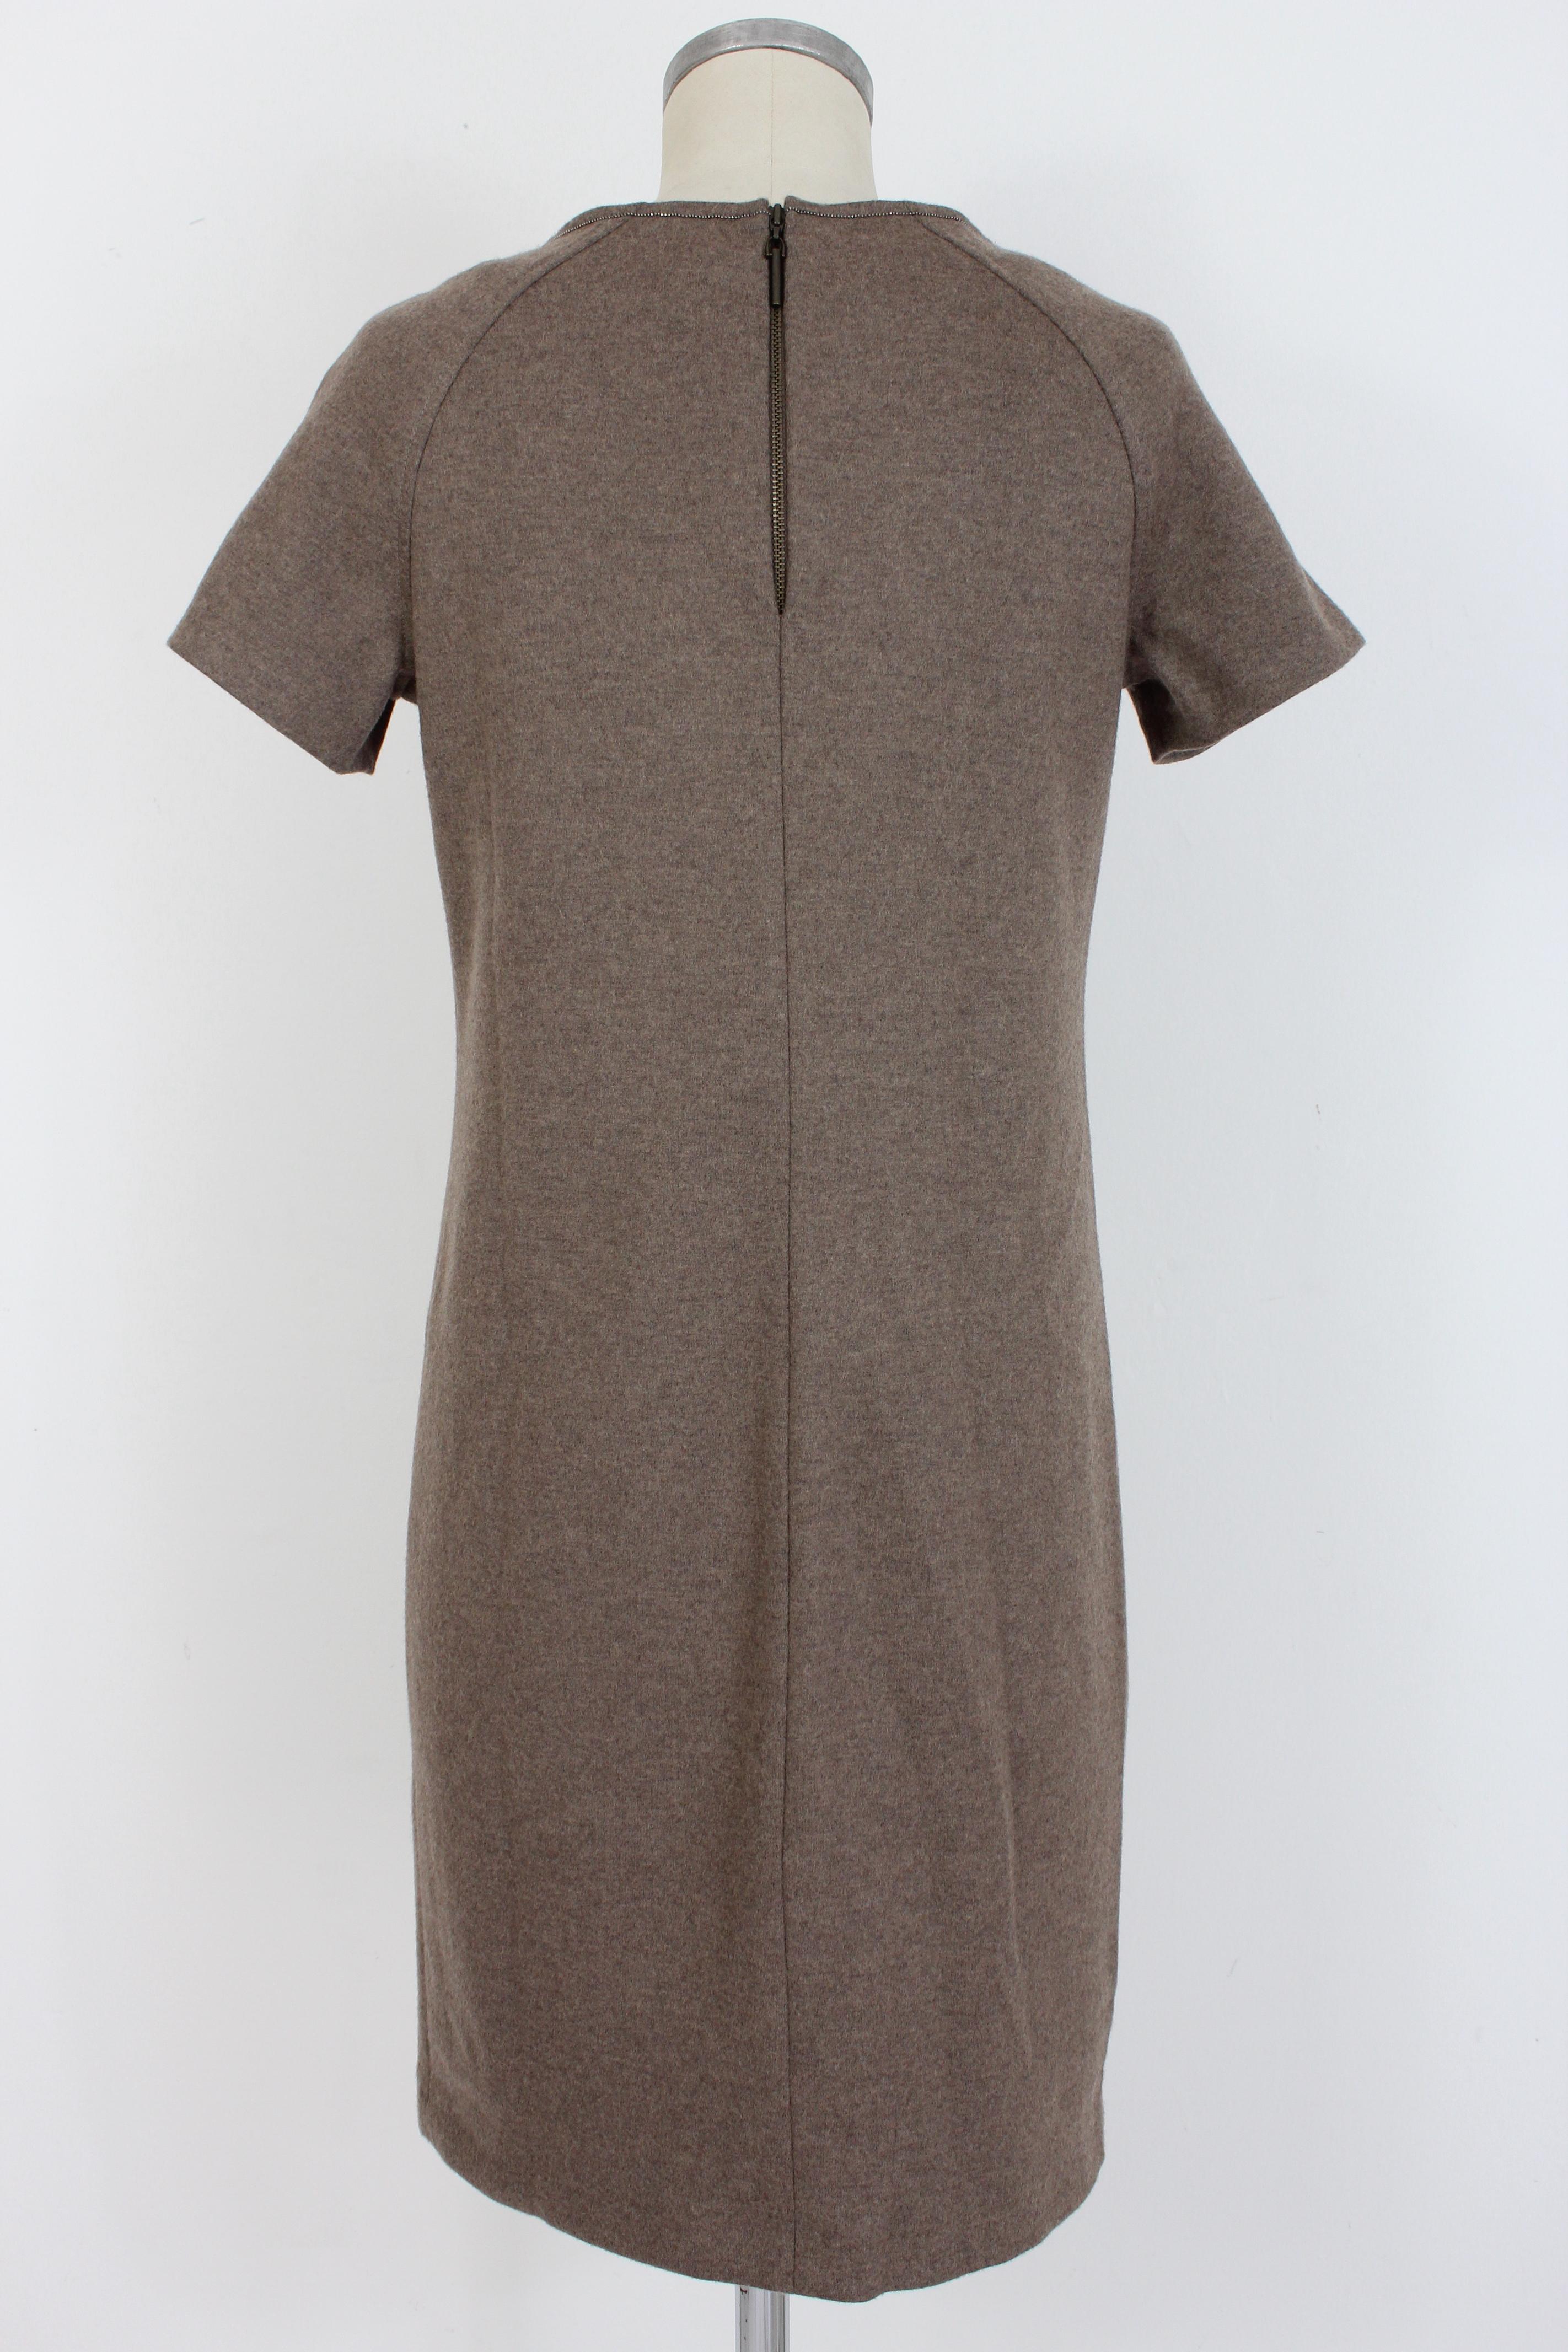 Sweater dress in 100% fine virgin wool by the designer Brunello Cucinelli. Made with the best Italian tailoring techniques in 100% fine virgin wool. Soft touch fabric, linear fit. Short sleeves and boat neckline, the dress is embellished with a line